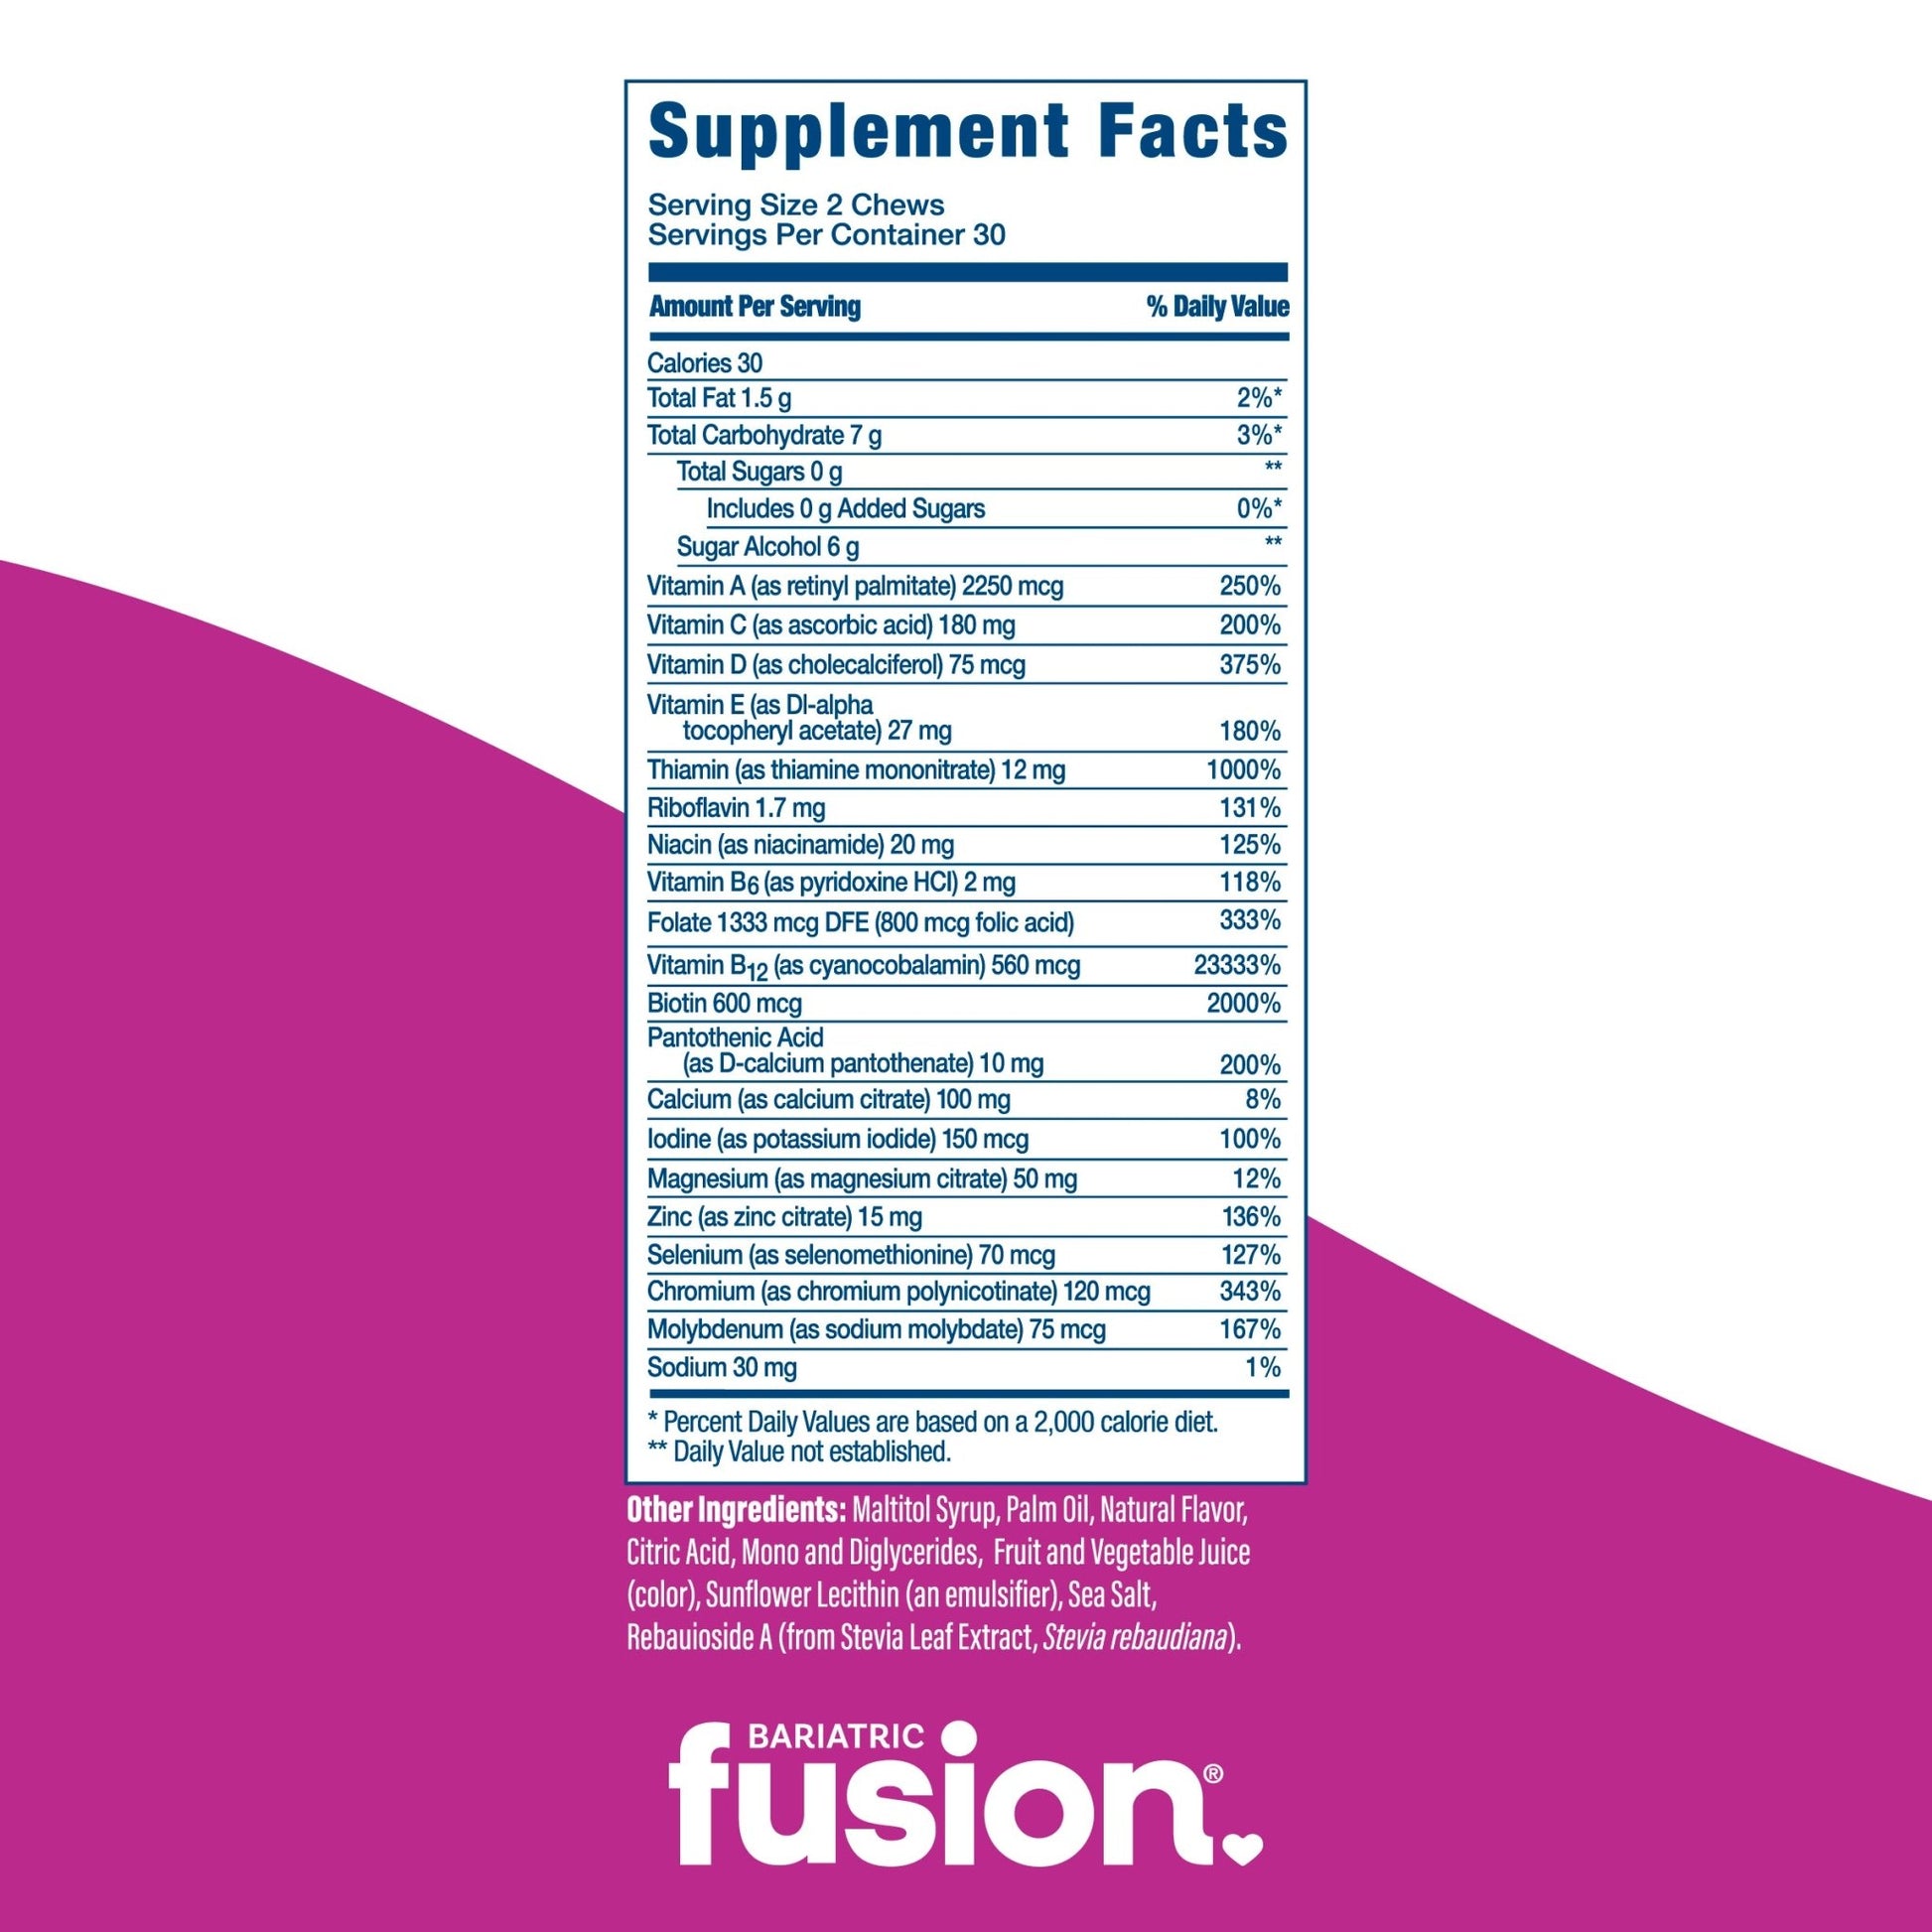 Mixed Berry Bariatric Multivitamin Soft Chew supplement facts.